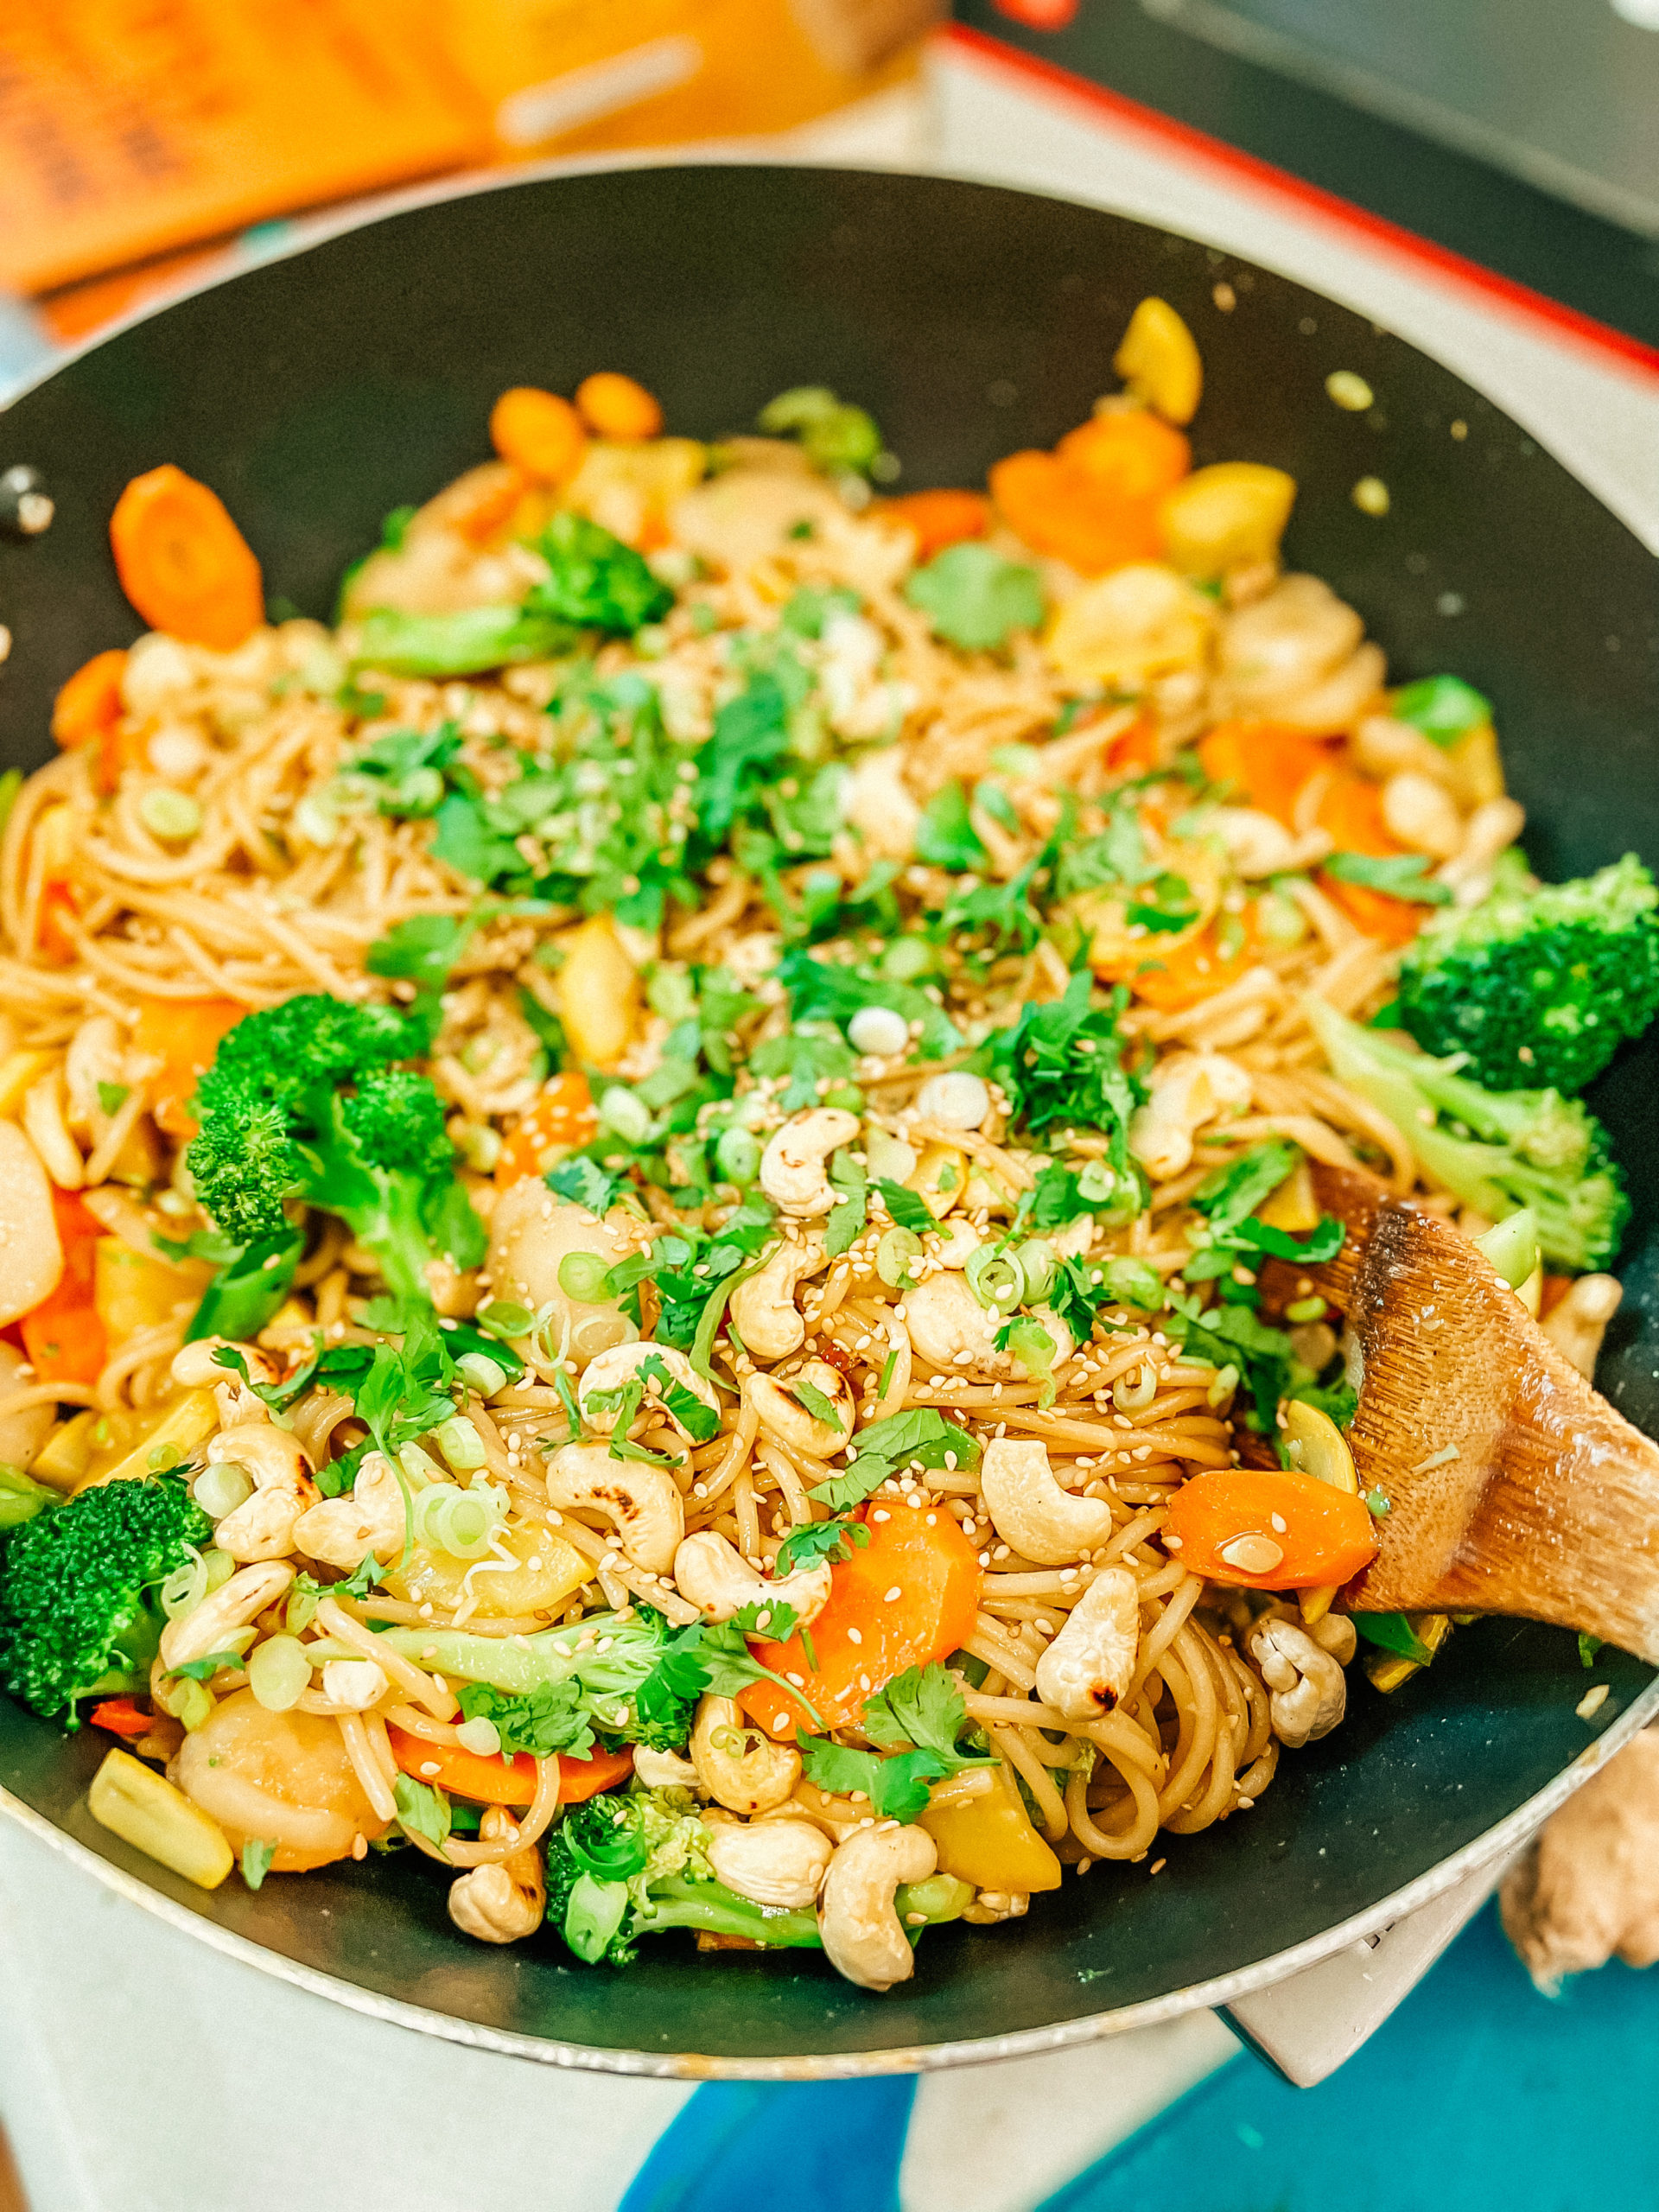 Rainbow Vegetable Stir Fry with Noodles